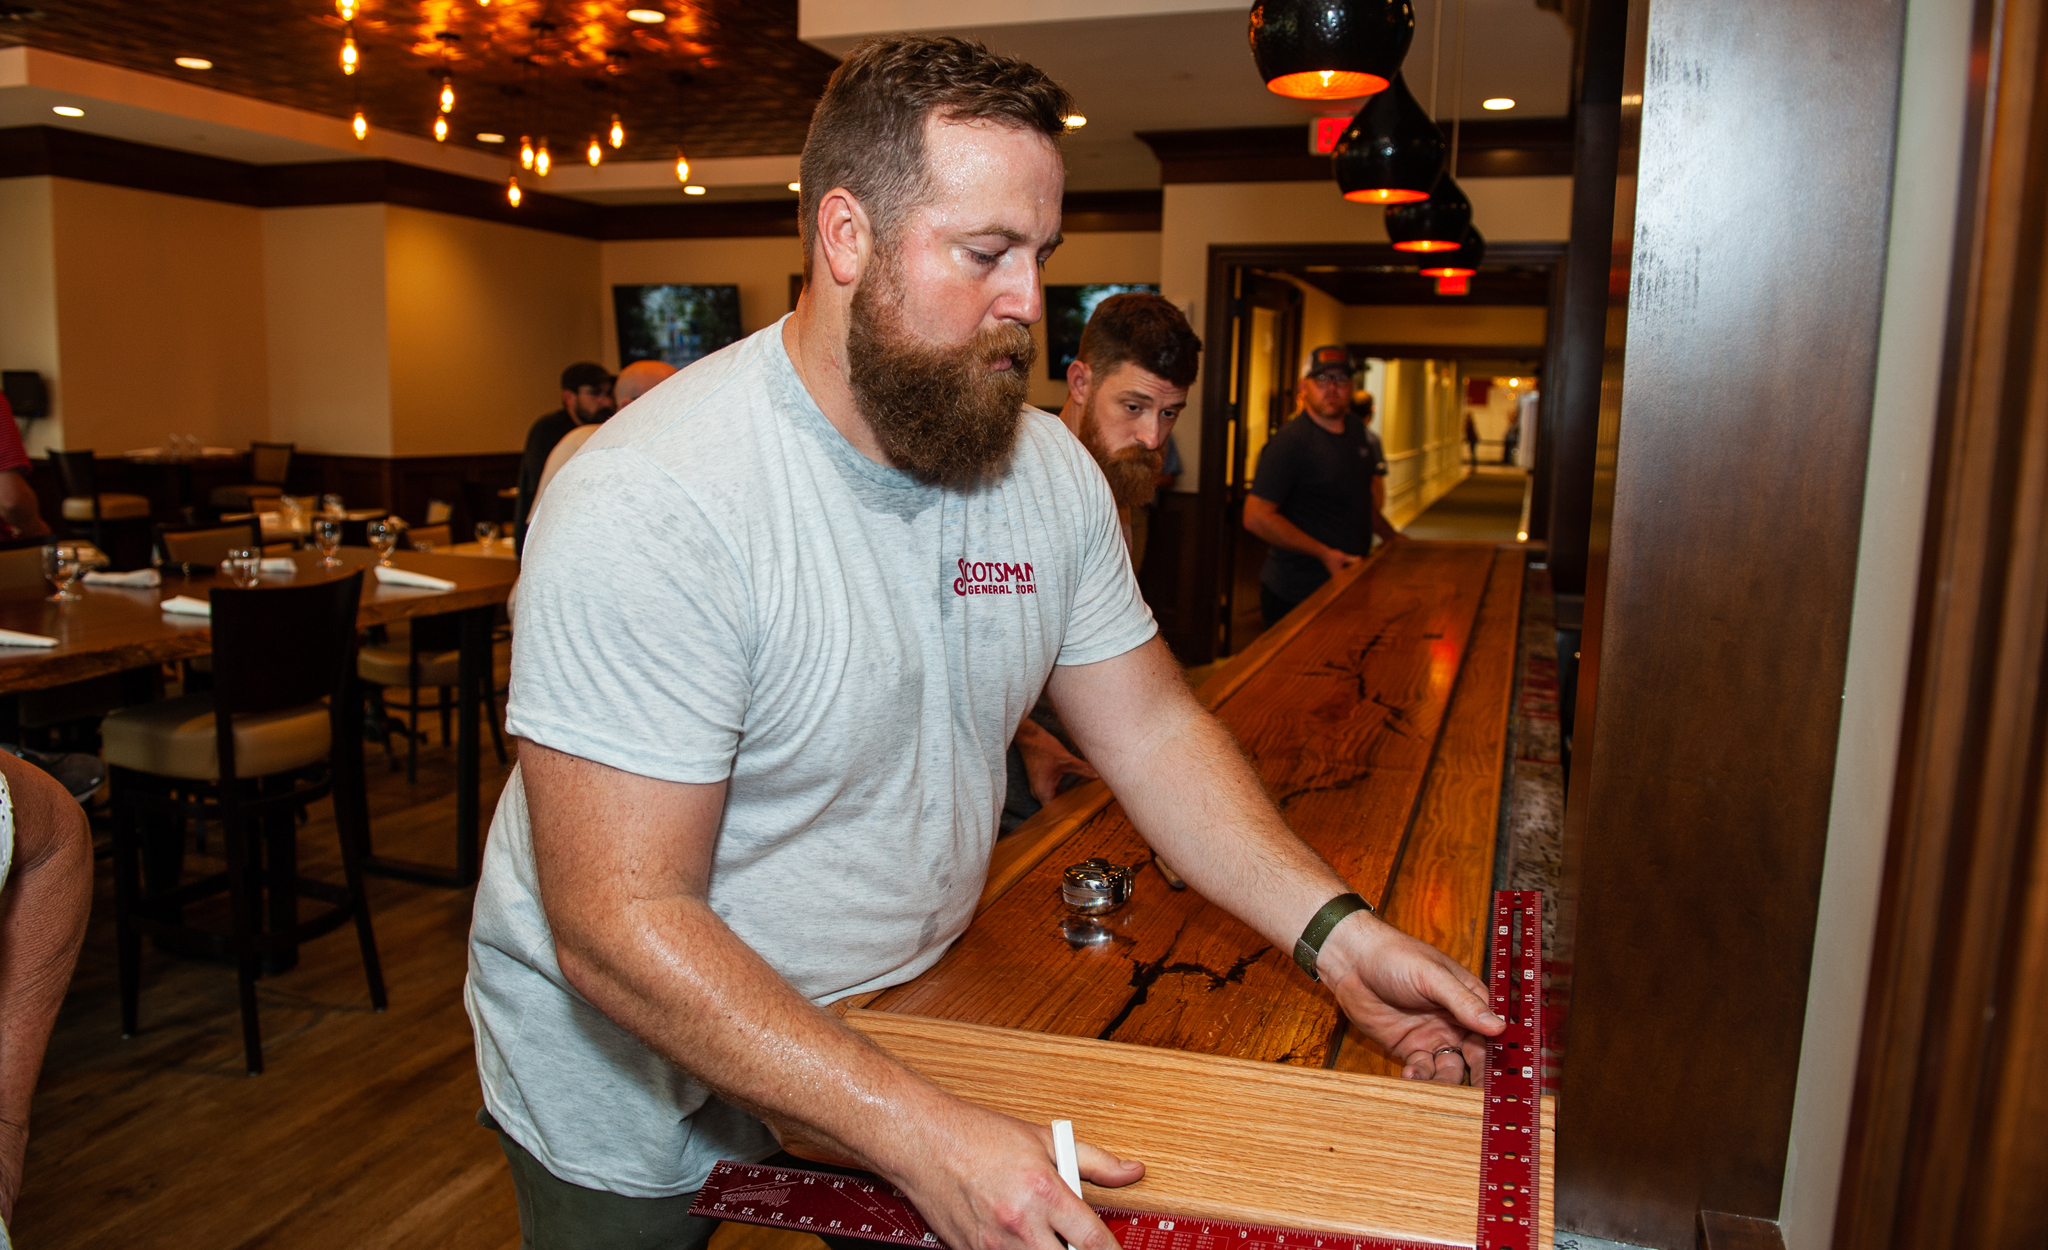 UM alumnus Ben Napier helps install a bar top he created at McCormick’s, the new full-service restaurant and bar at The Inn at Ole Miss. Photo by Bill Dabney/UM Foundation